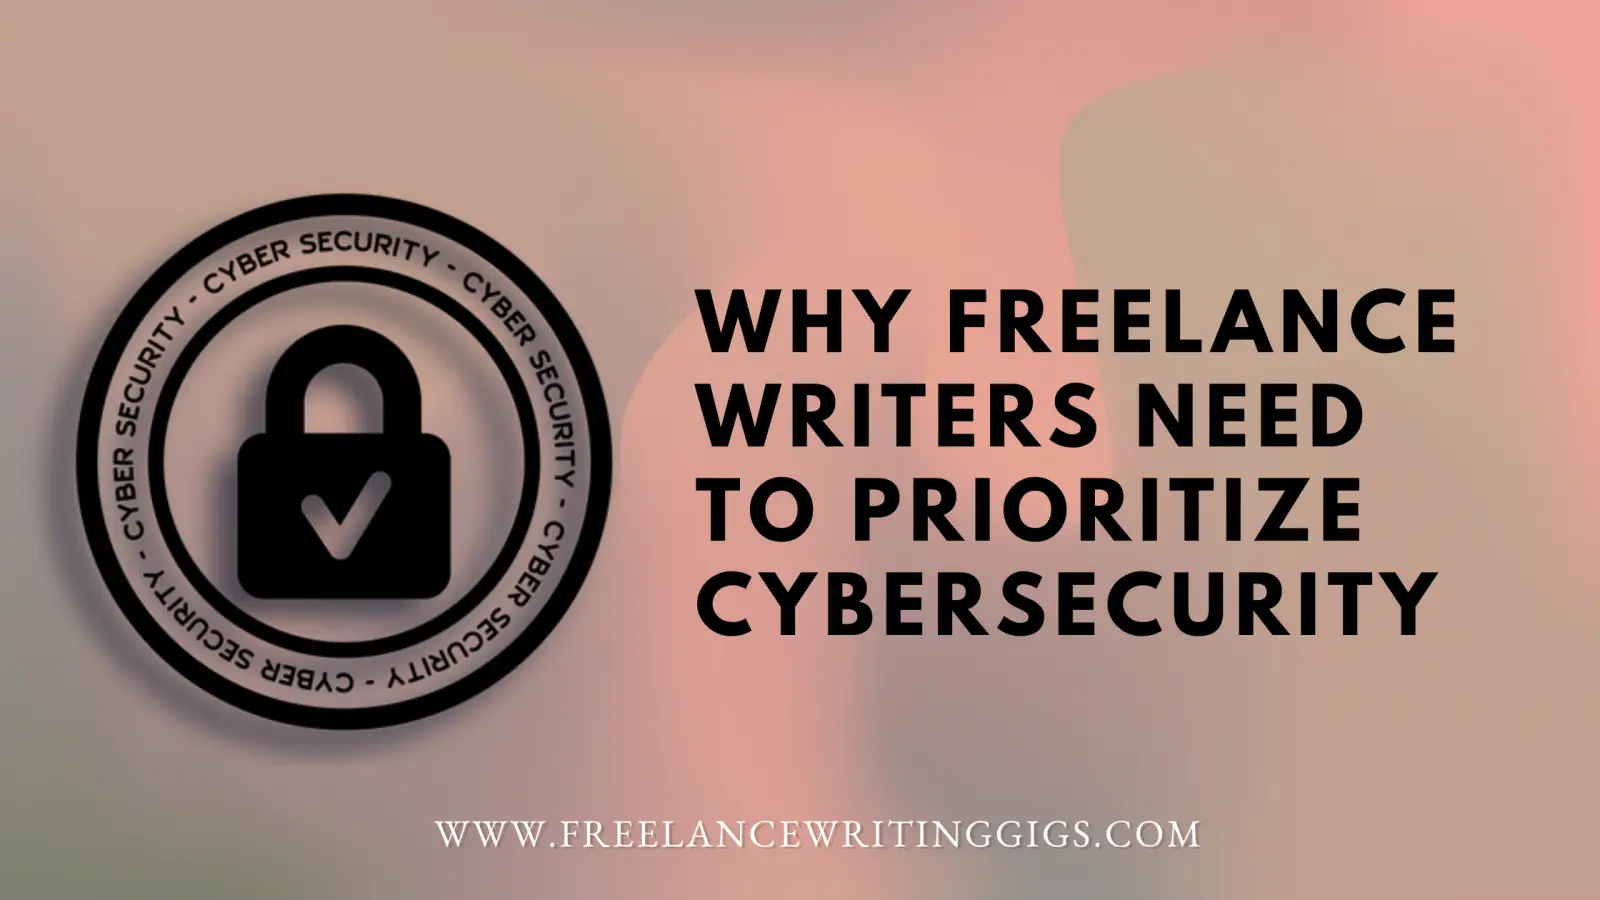 Why Freelance Writers Need to Prioritize Cybersecurity